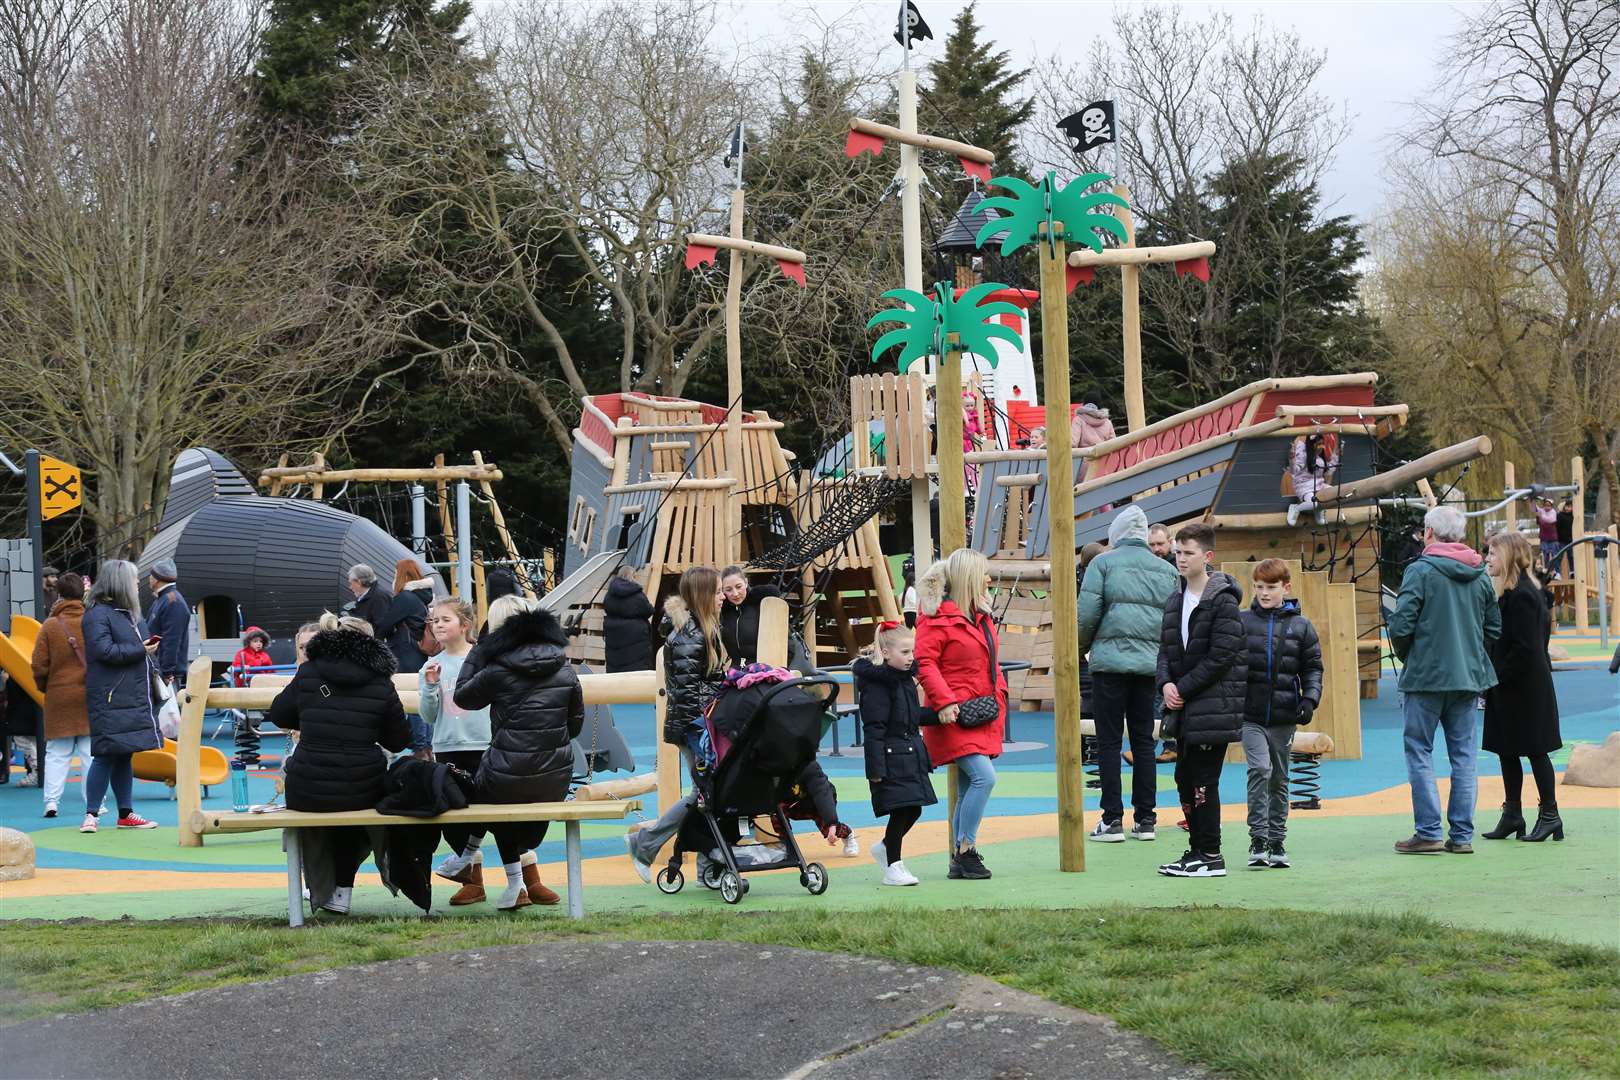 Plans to revamp the old play area were announced last November